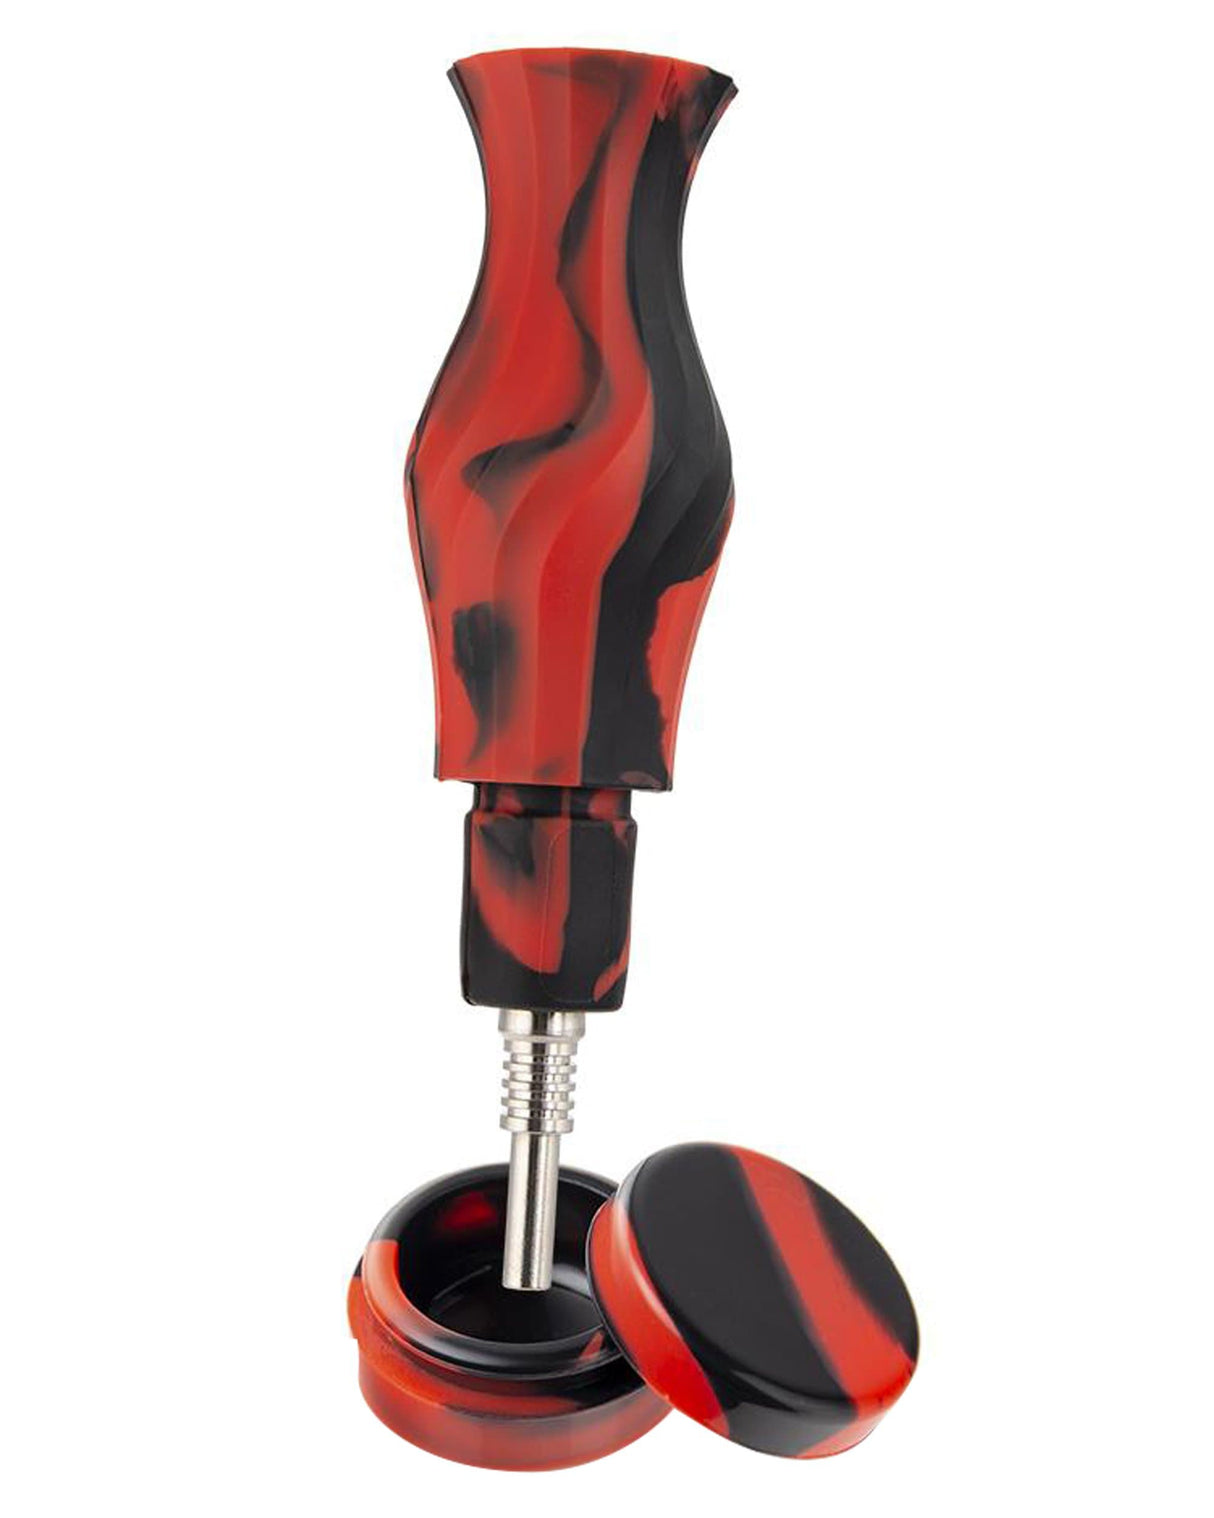 Ooze Echo Silicone Bong in red and black with stash storage, front view on white background